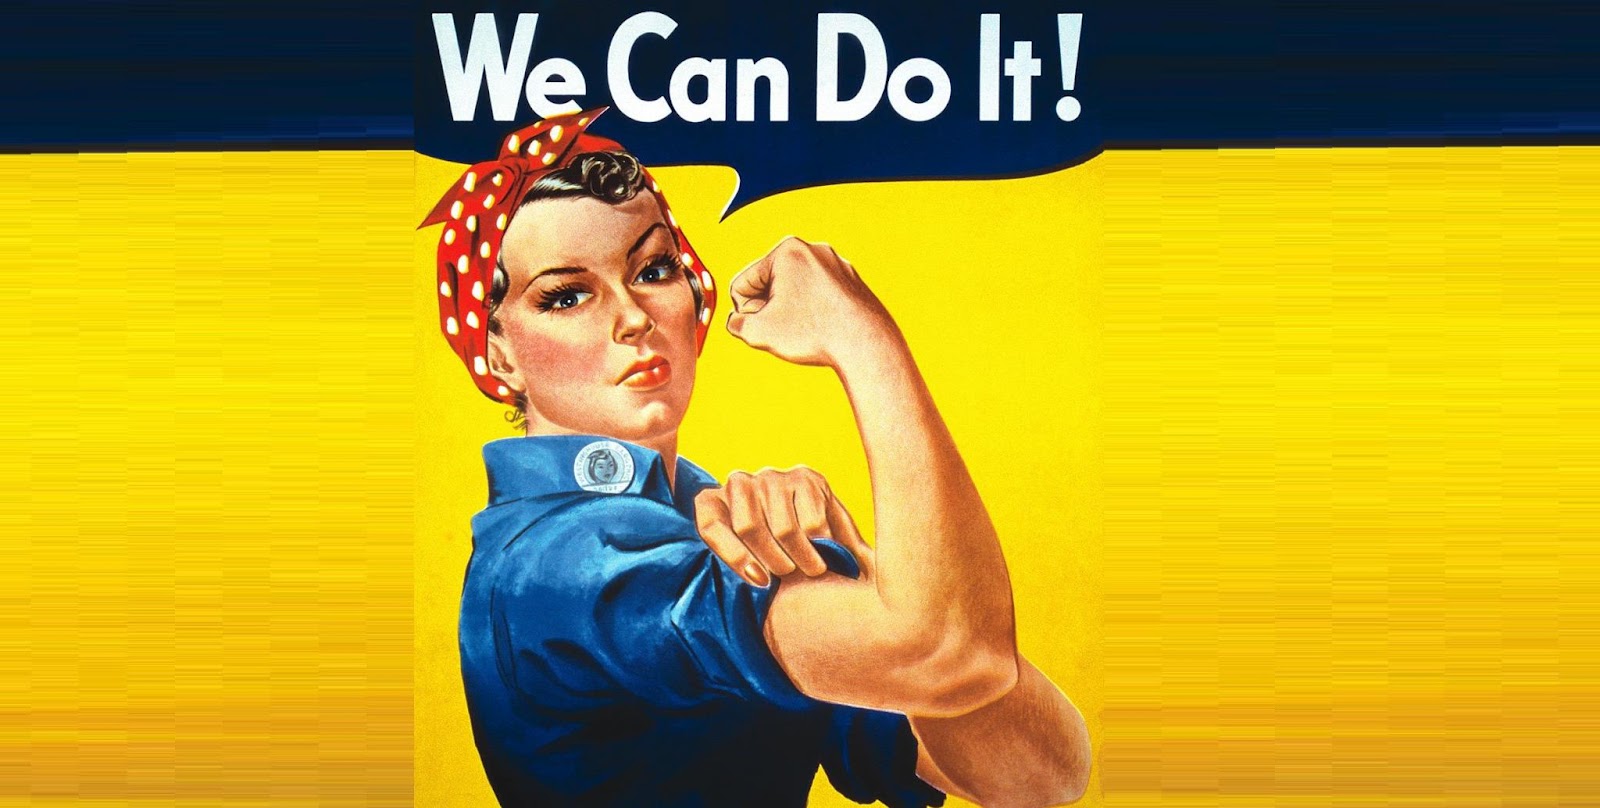 We can download. Плакат «we can do it! ». Rosie the Riveter плакат. Плакат с сильной женщиной цу СФТ ВЩ ше. We can do it poster Original.